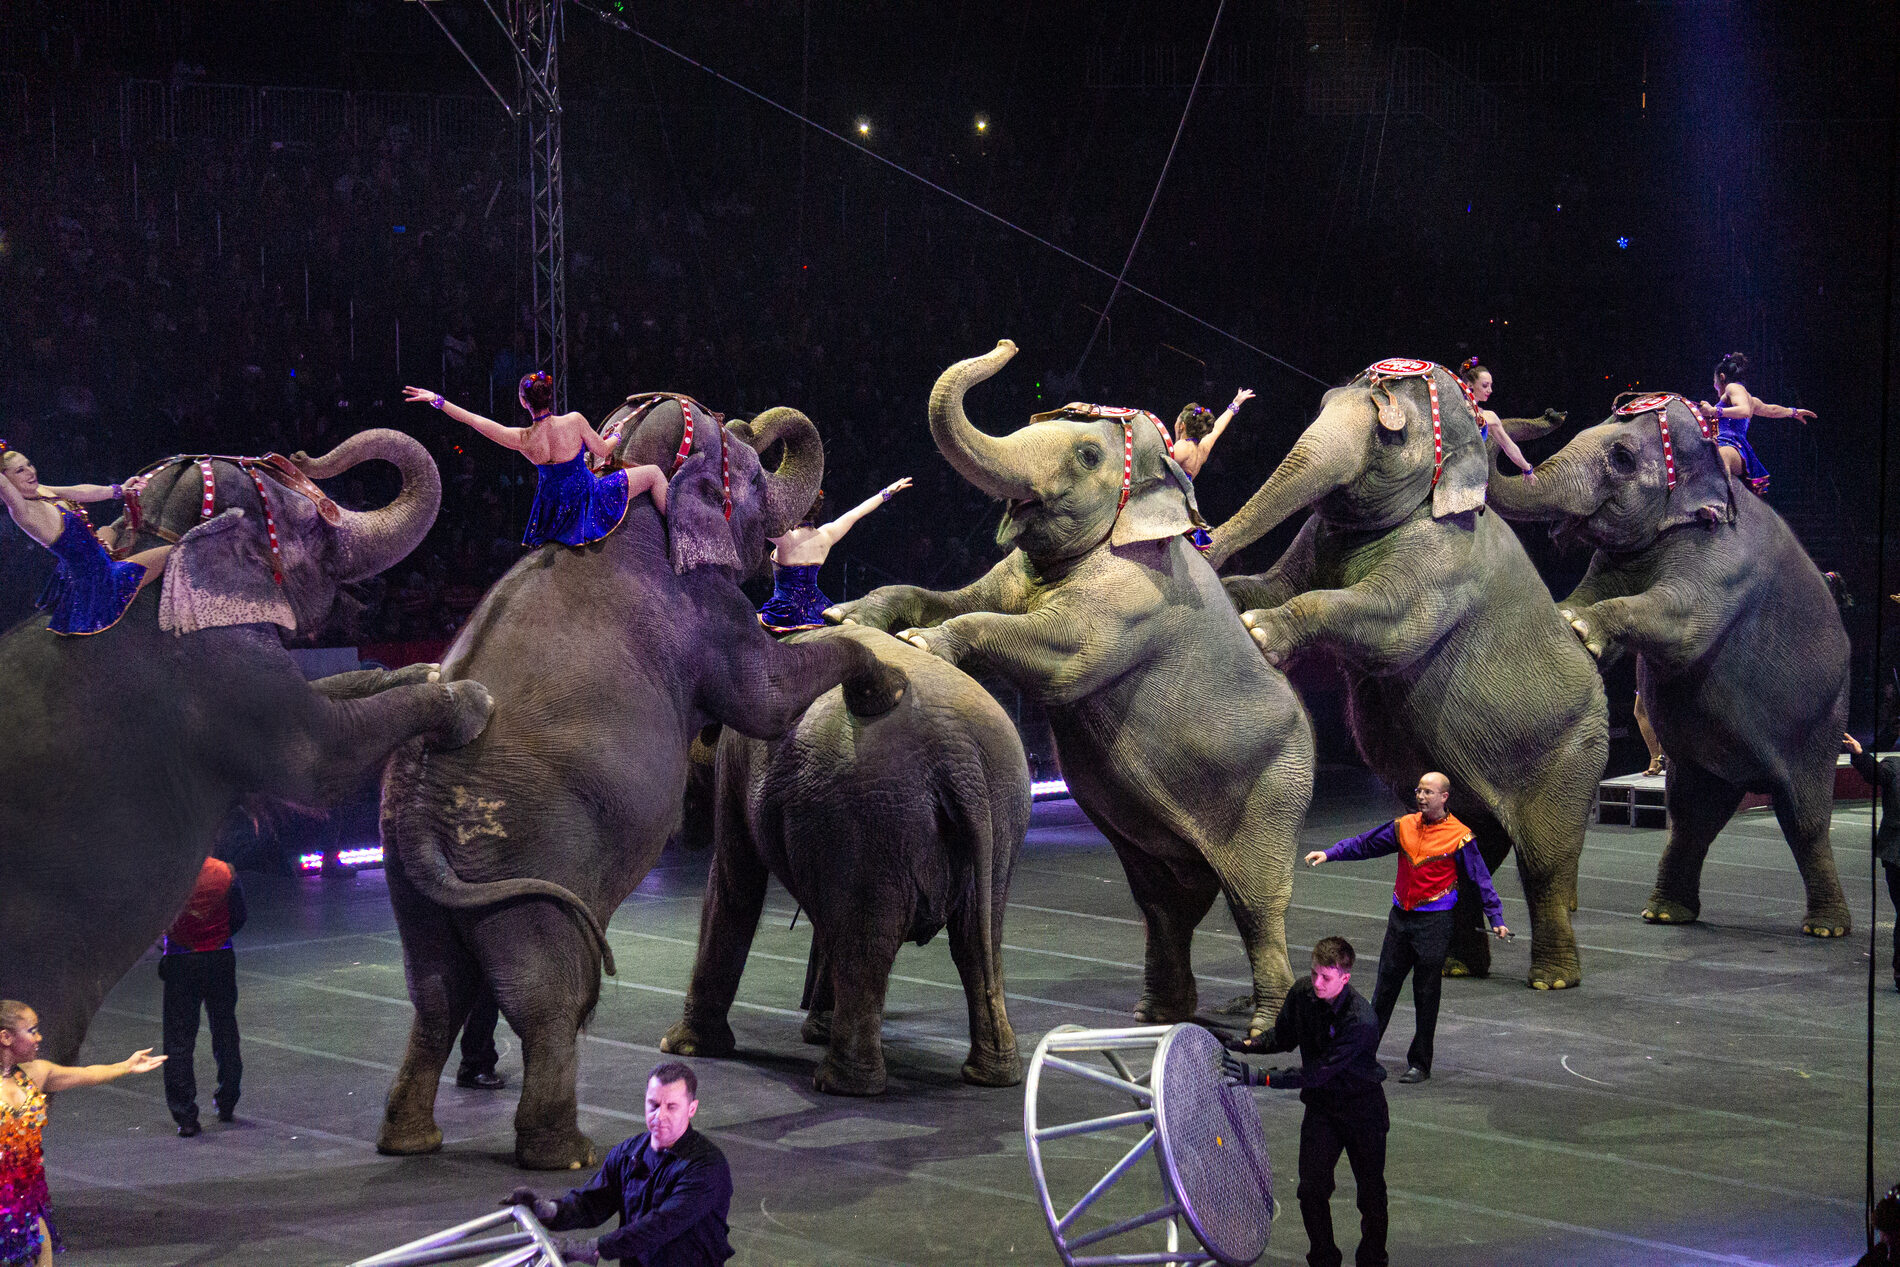 Six elephants in the circus resting their front two feet on the back of elephant nearest to them in formation, performers posing on their upper backs.